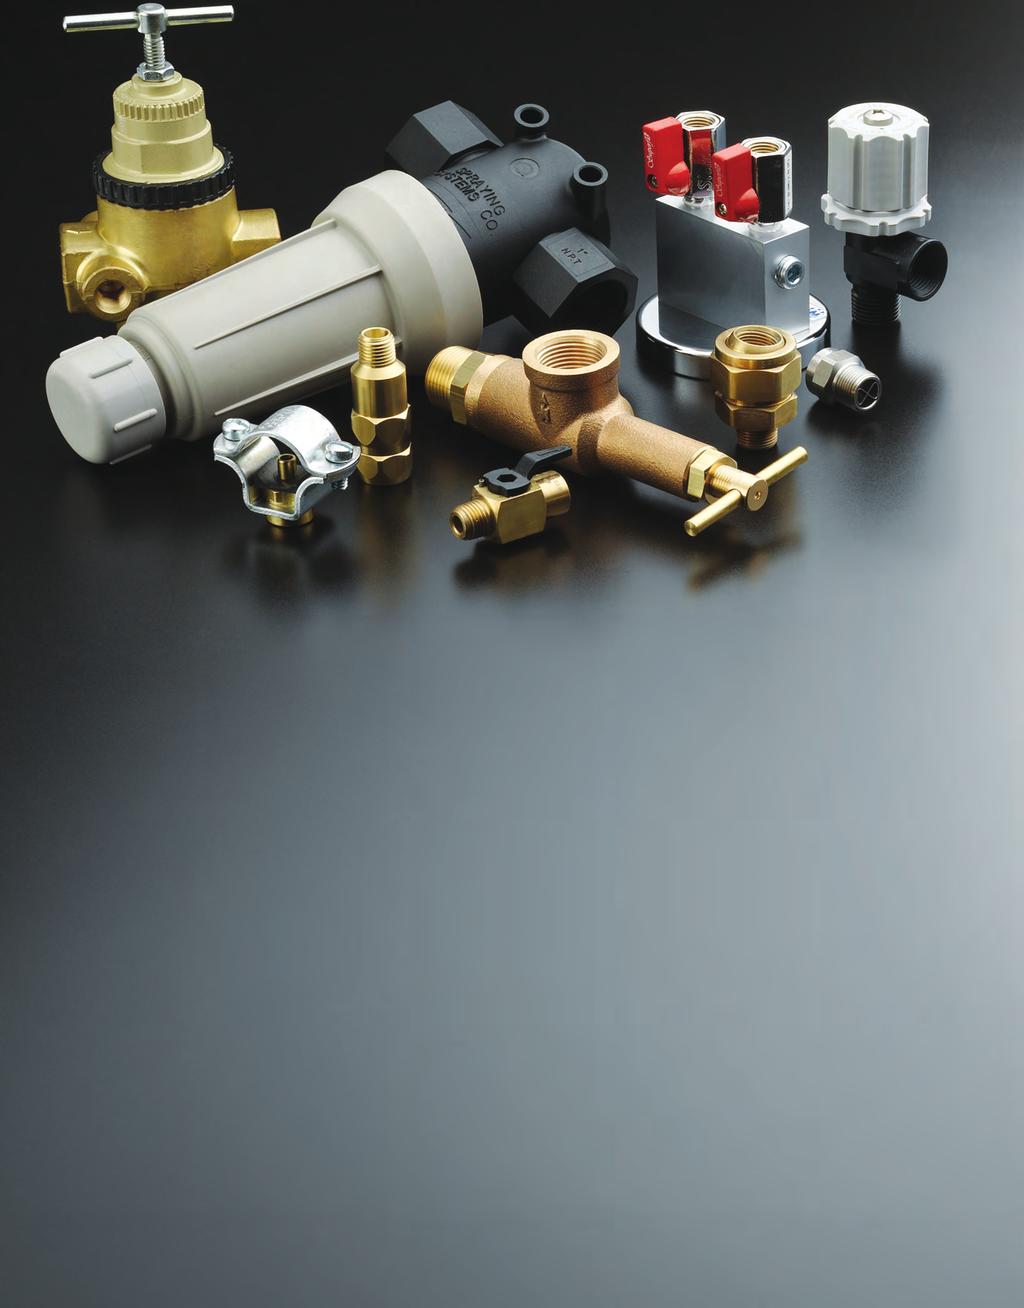 c c e s s o r i e s Introduction Optimize Performance and Simplify Installation Simplify Nozzle Mounting and Positioning Split-eyelet connectors djustable ball fittings djustable hoses and mounting